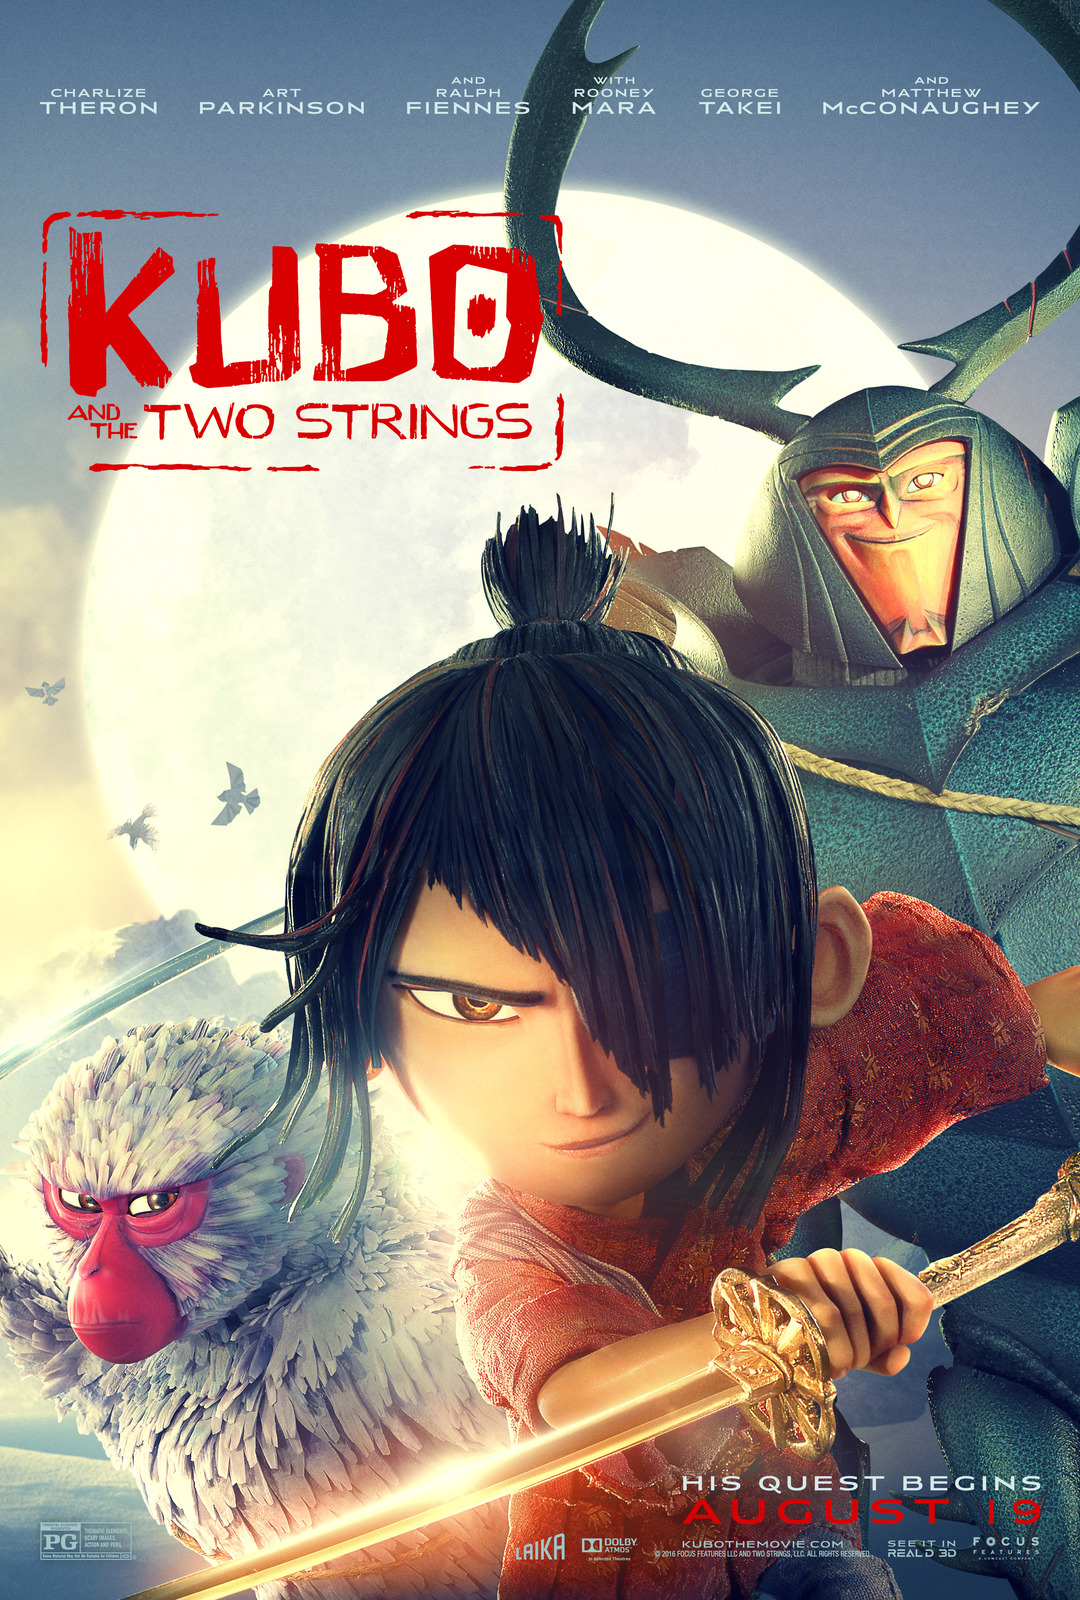 Alita: Battle Angel and Kubo and the Two Strings